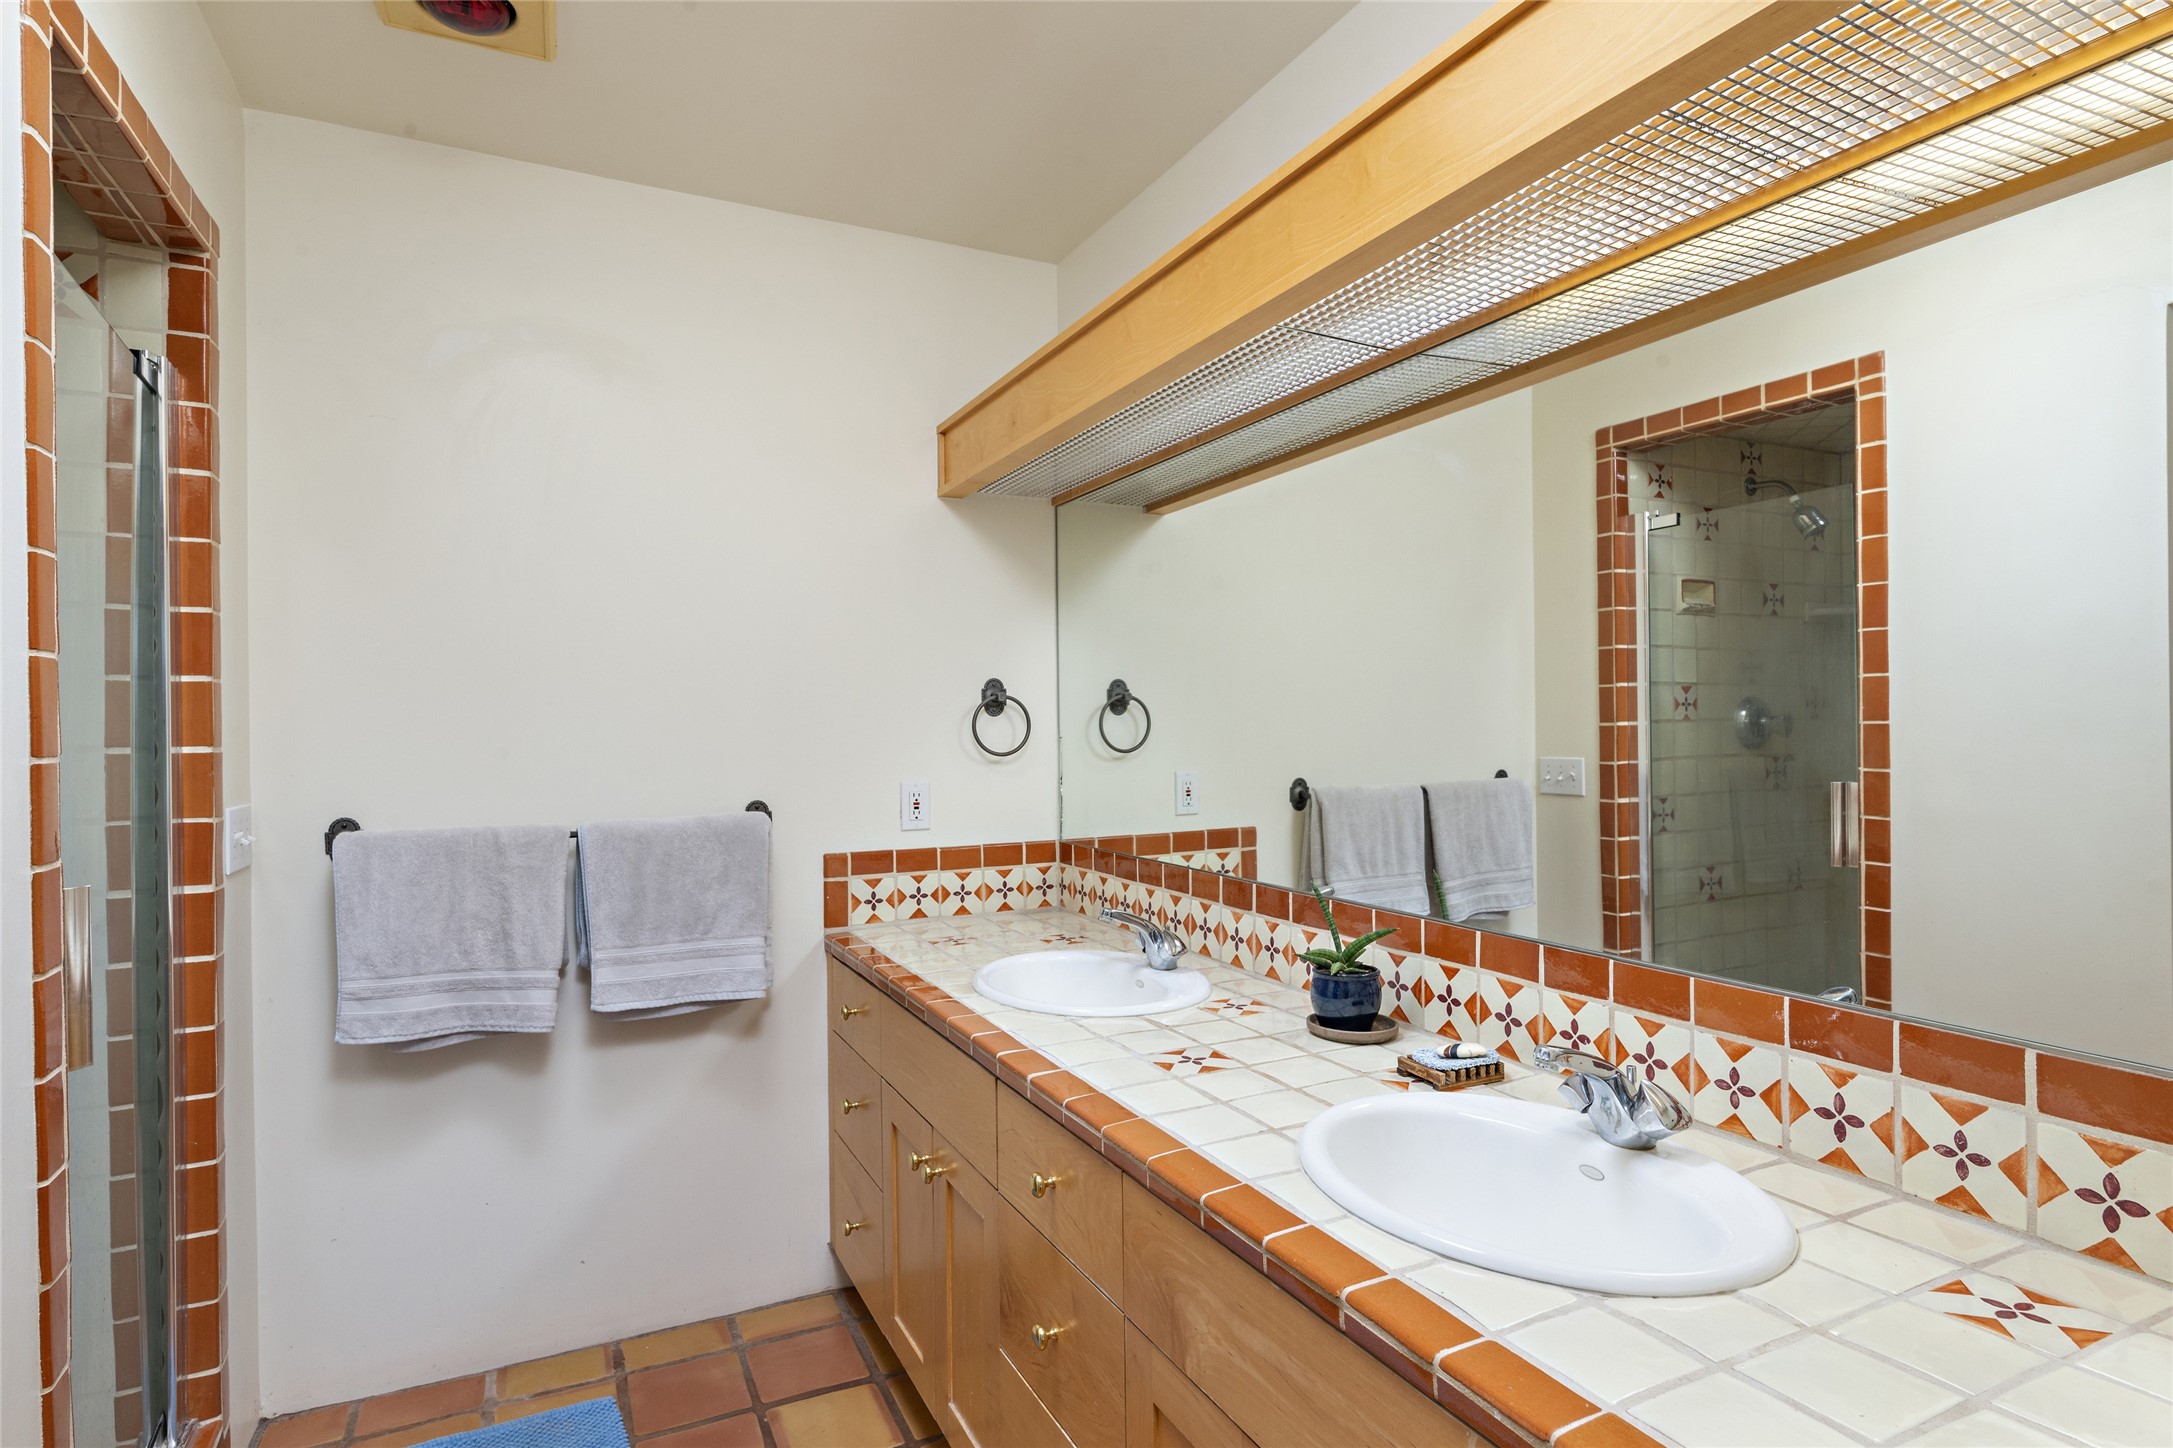 Double sinks in the primary bathroom and on the left is the walk in shower